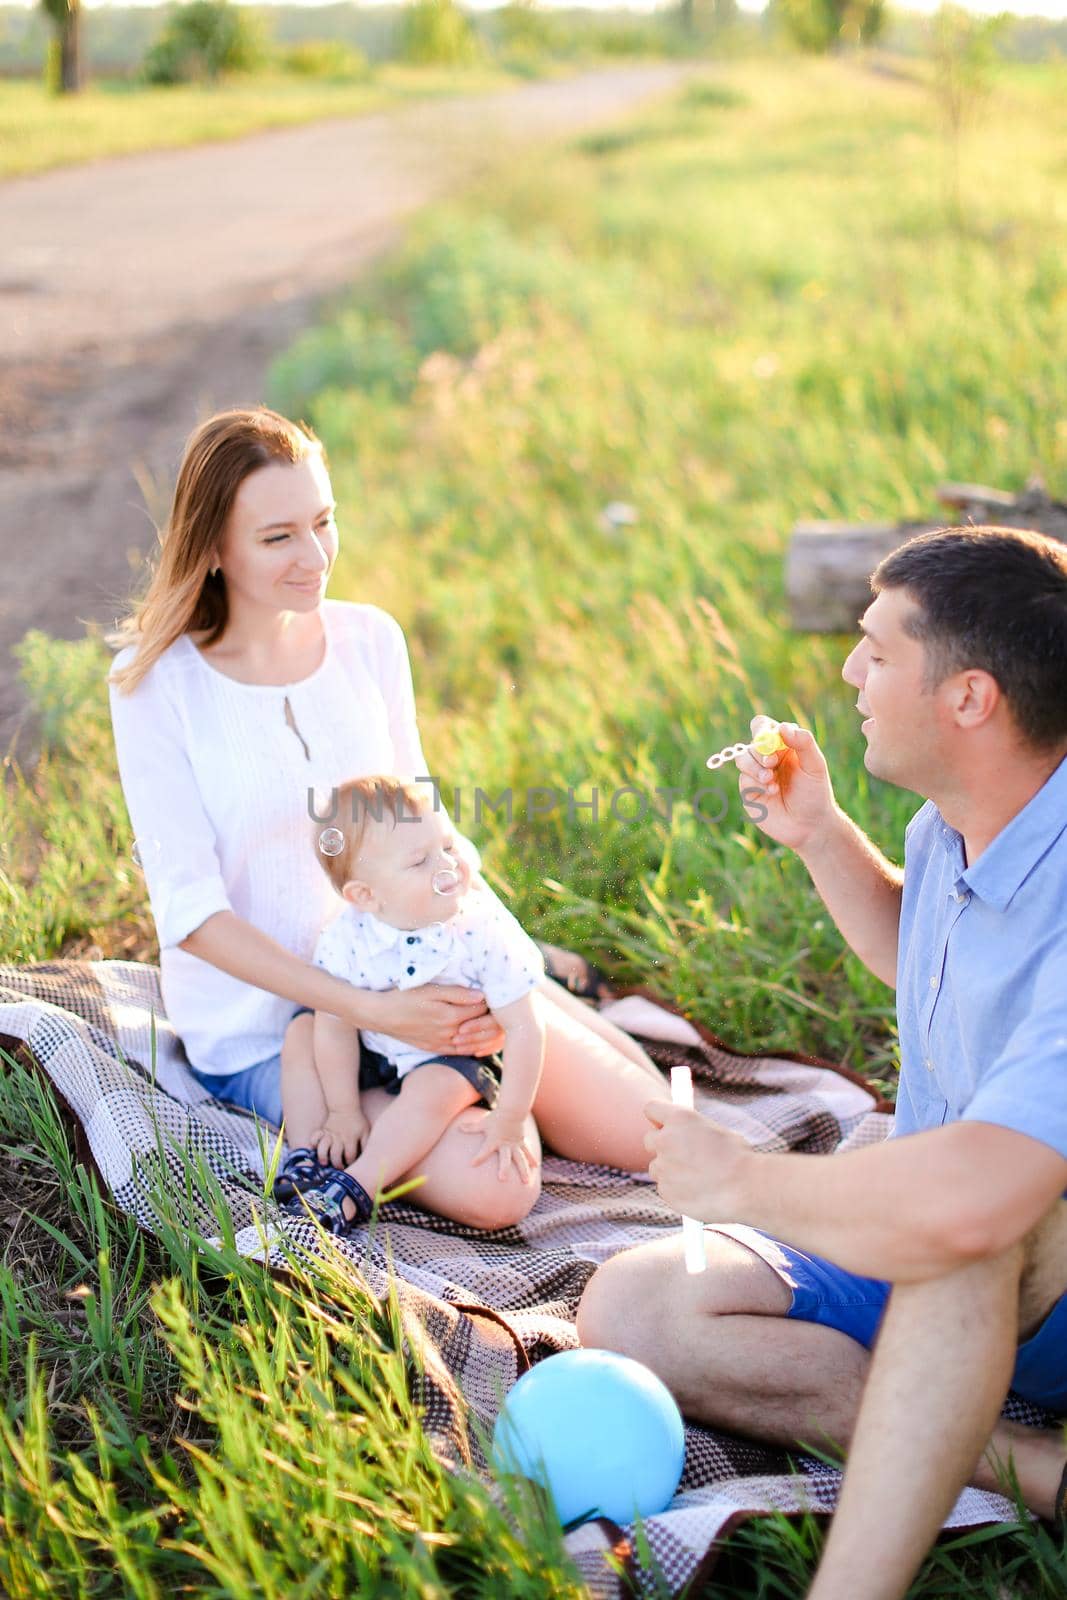 Young happymother and father sittling on grass with little baby and blowing bubbles. Concept of picnic and children, parenthood and leisure time.